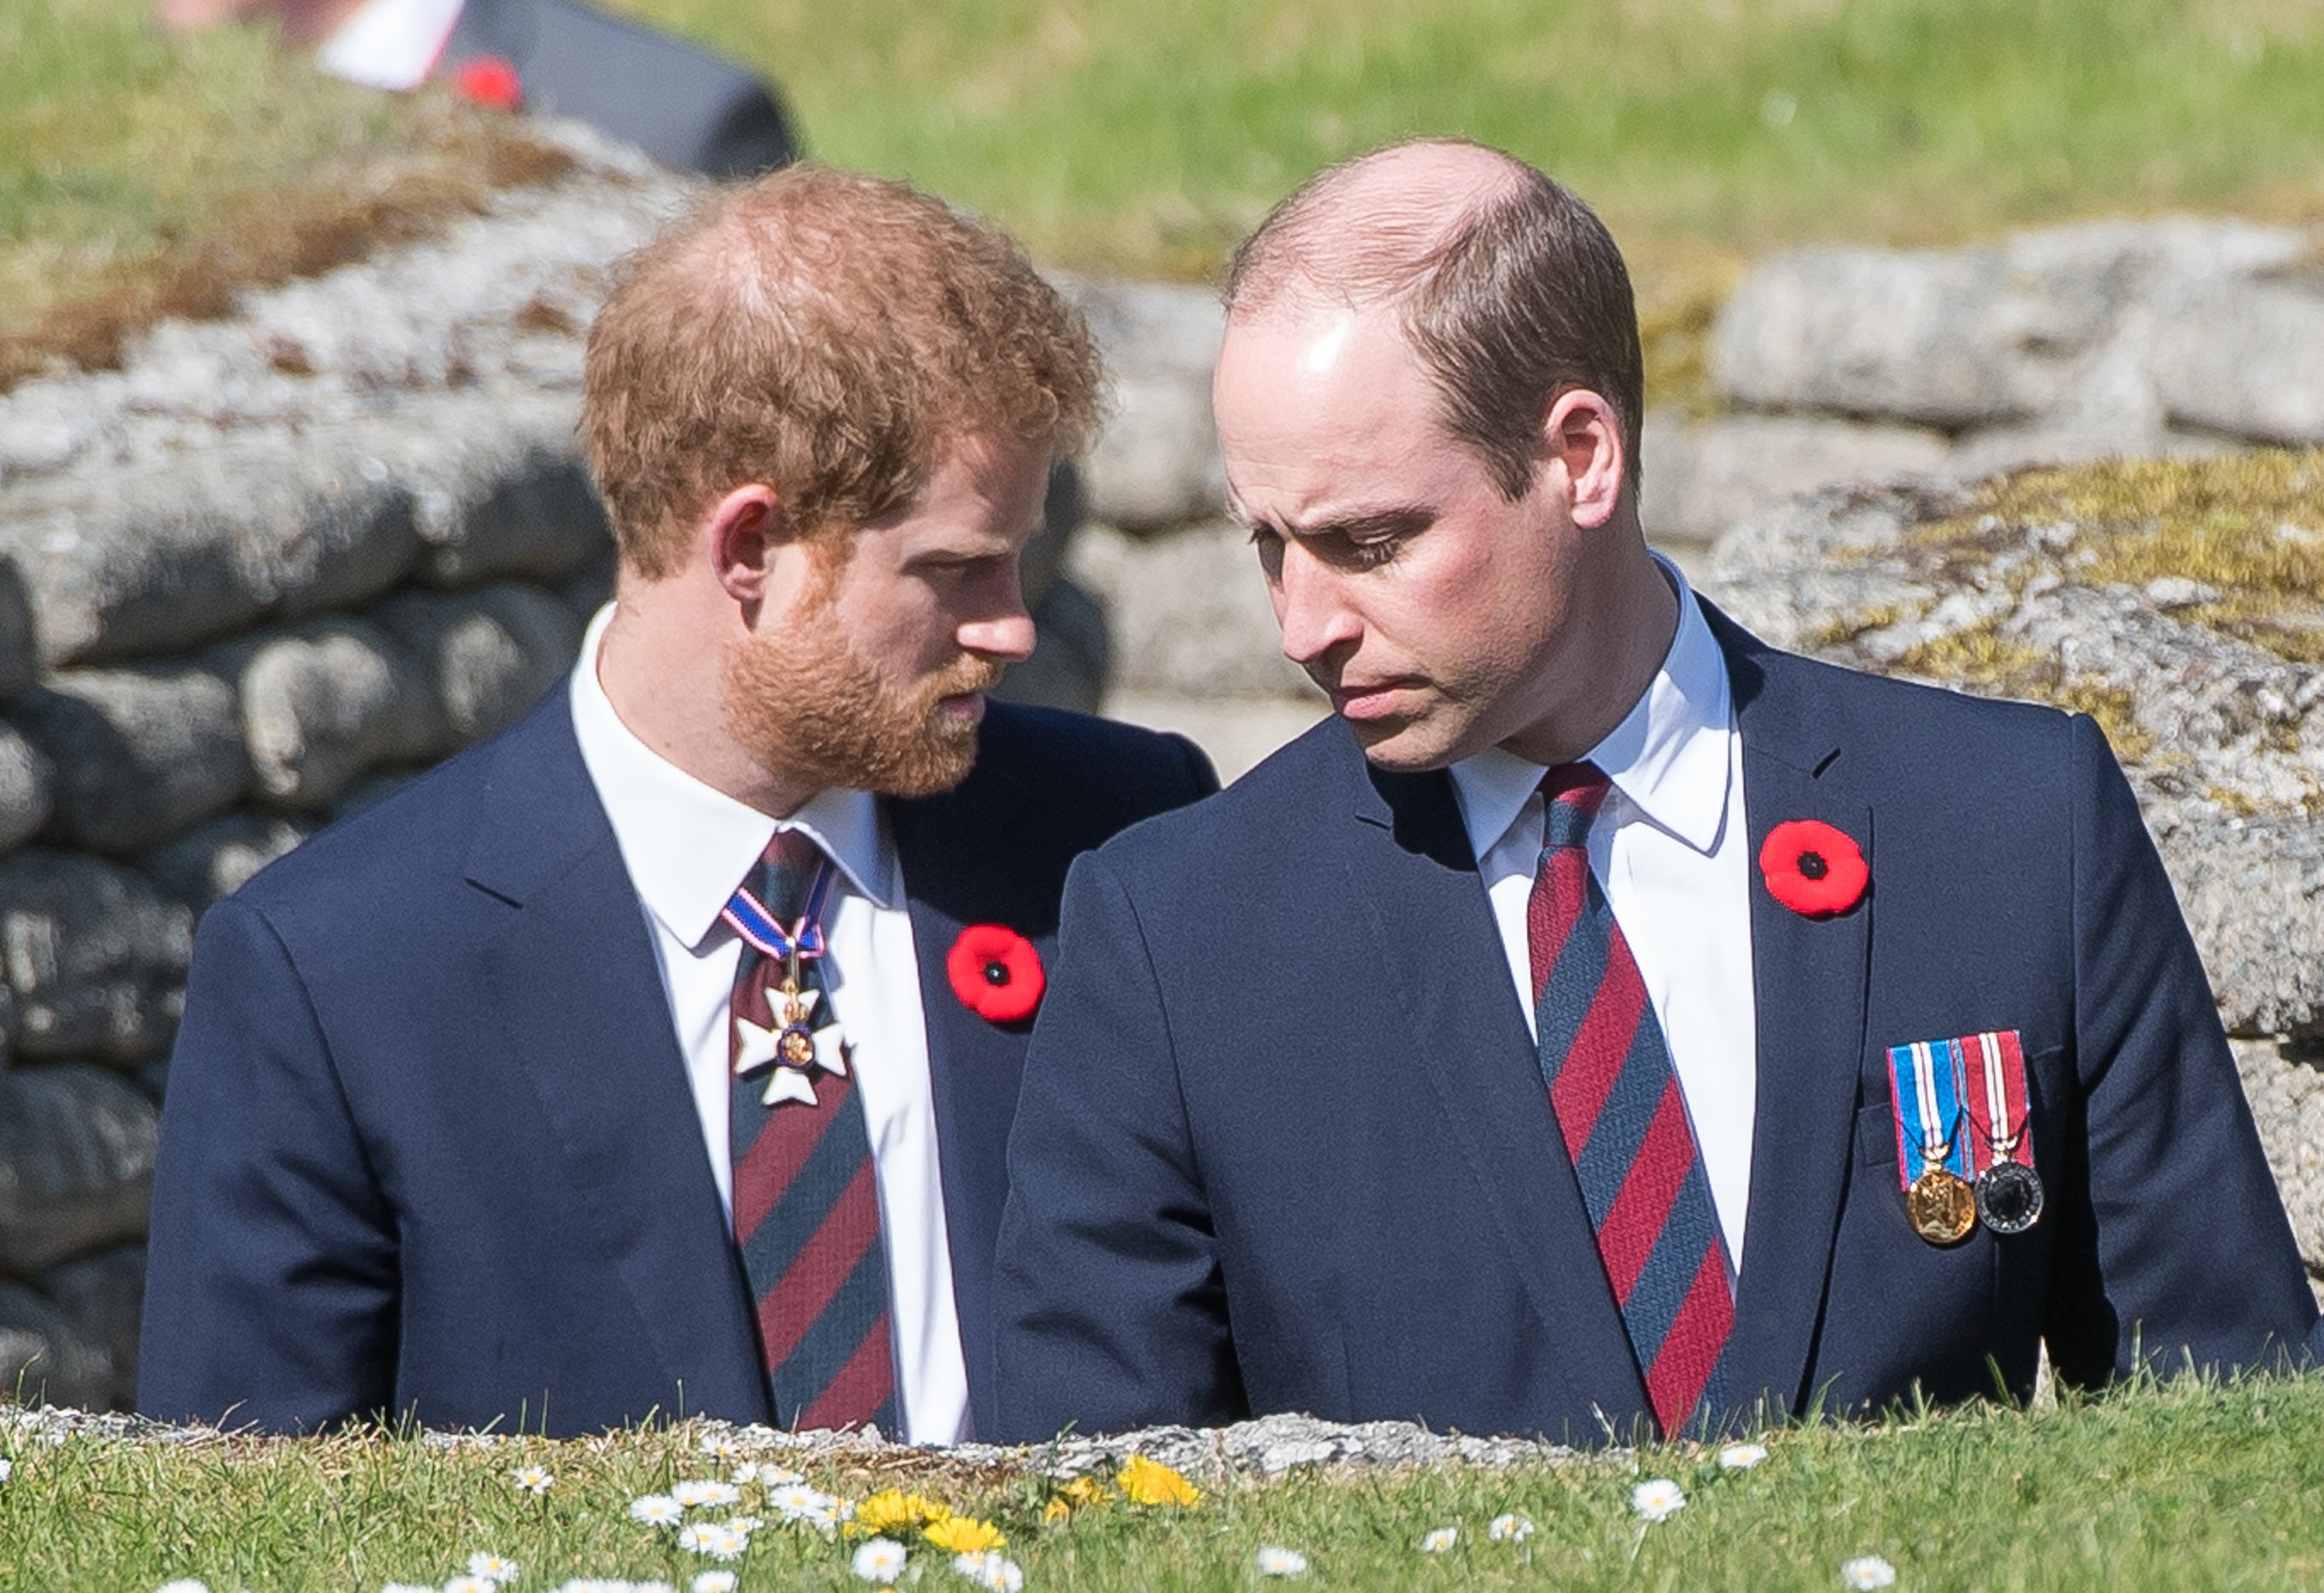 Prince William and Prince Harry walk through a trench during the commemorations for the 100th anniversary of the battle of Vimy Ridge on April 9, 2017, in Lille, France. | Source: Getty Images